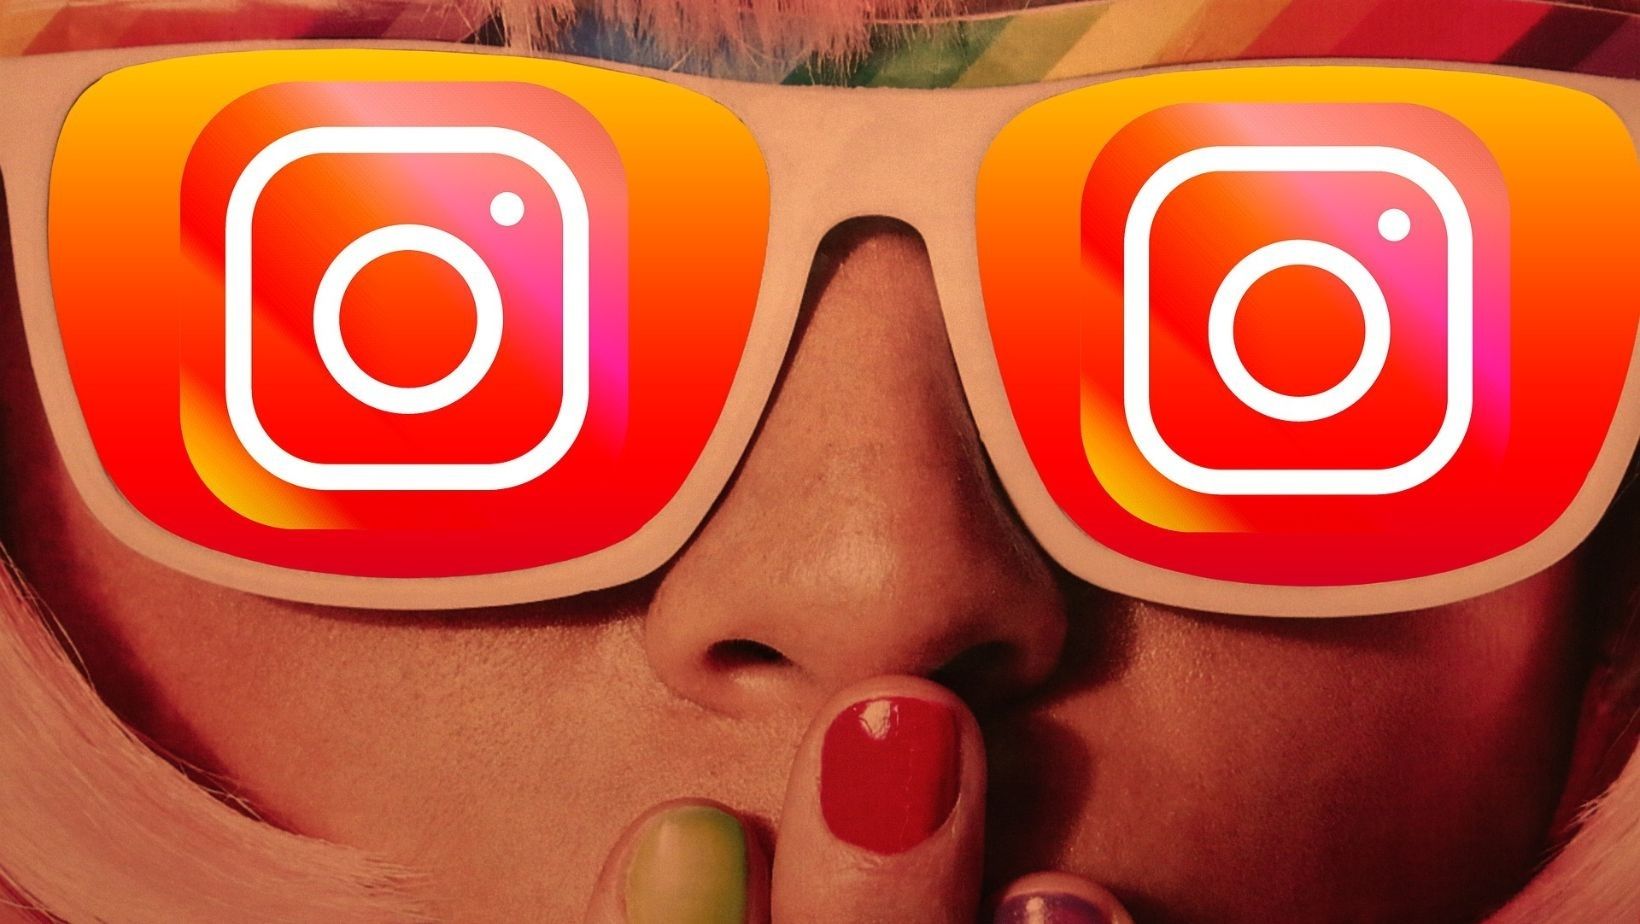 Instagram Introduces Promotional Code Ads to Stimulate Purchasing Behavior